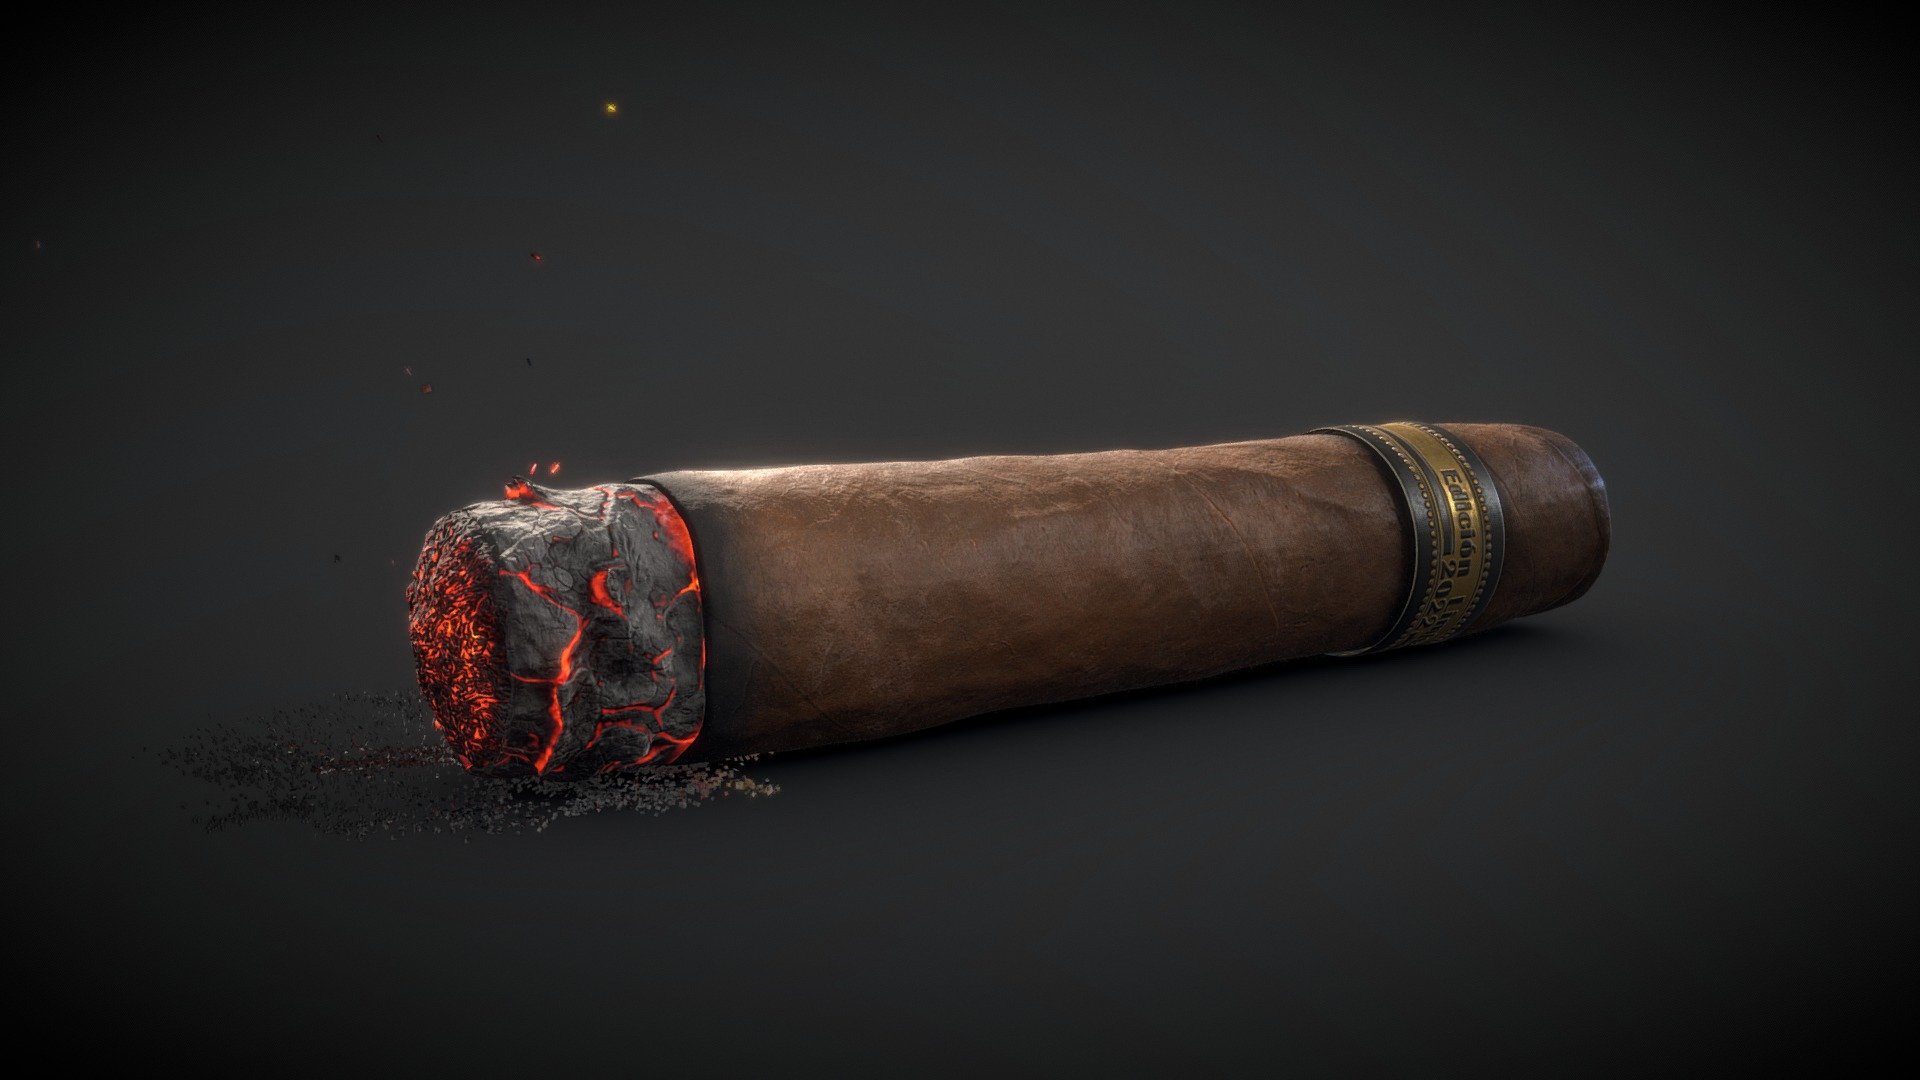 Hello people! I made a cuban cigar burning with ashes and smoke (smoke fx is just on my Artstation post since I did with Niagara). 

My pipeline to model the cigar was I did a blockout on Maya, then brought to ZBrsuh to add all of the details and then reduced to low poly with ZBrush and Maya tools. 

The ashes were made on Blender with their particle tool and the smoke on Houdini (sprite sheet) and then used the Niagara system to assemble in engine.

What is included:




7 texture maps (Base Color, Roughness, Metallic, AO, Normal, Height, Emissive)

4 models (full cuban cigar with ashes, and just the cuban cigar in fbx and obj)

1 sprite sheet for smoke fx

Technical details:




Cigar has 14628 polys

Textures are 4096 x 4096

Sprite sheet is 5632 x 6144

*If you need other files, let me know - Cuban Cigar Burning - Buy Royalty Free 3D model by williamornelas 3d model